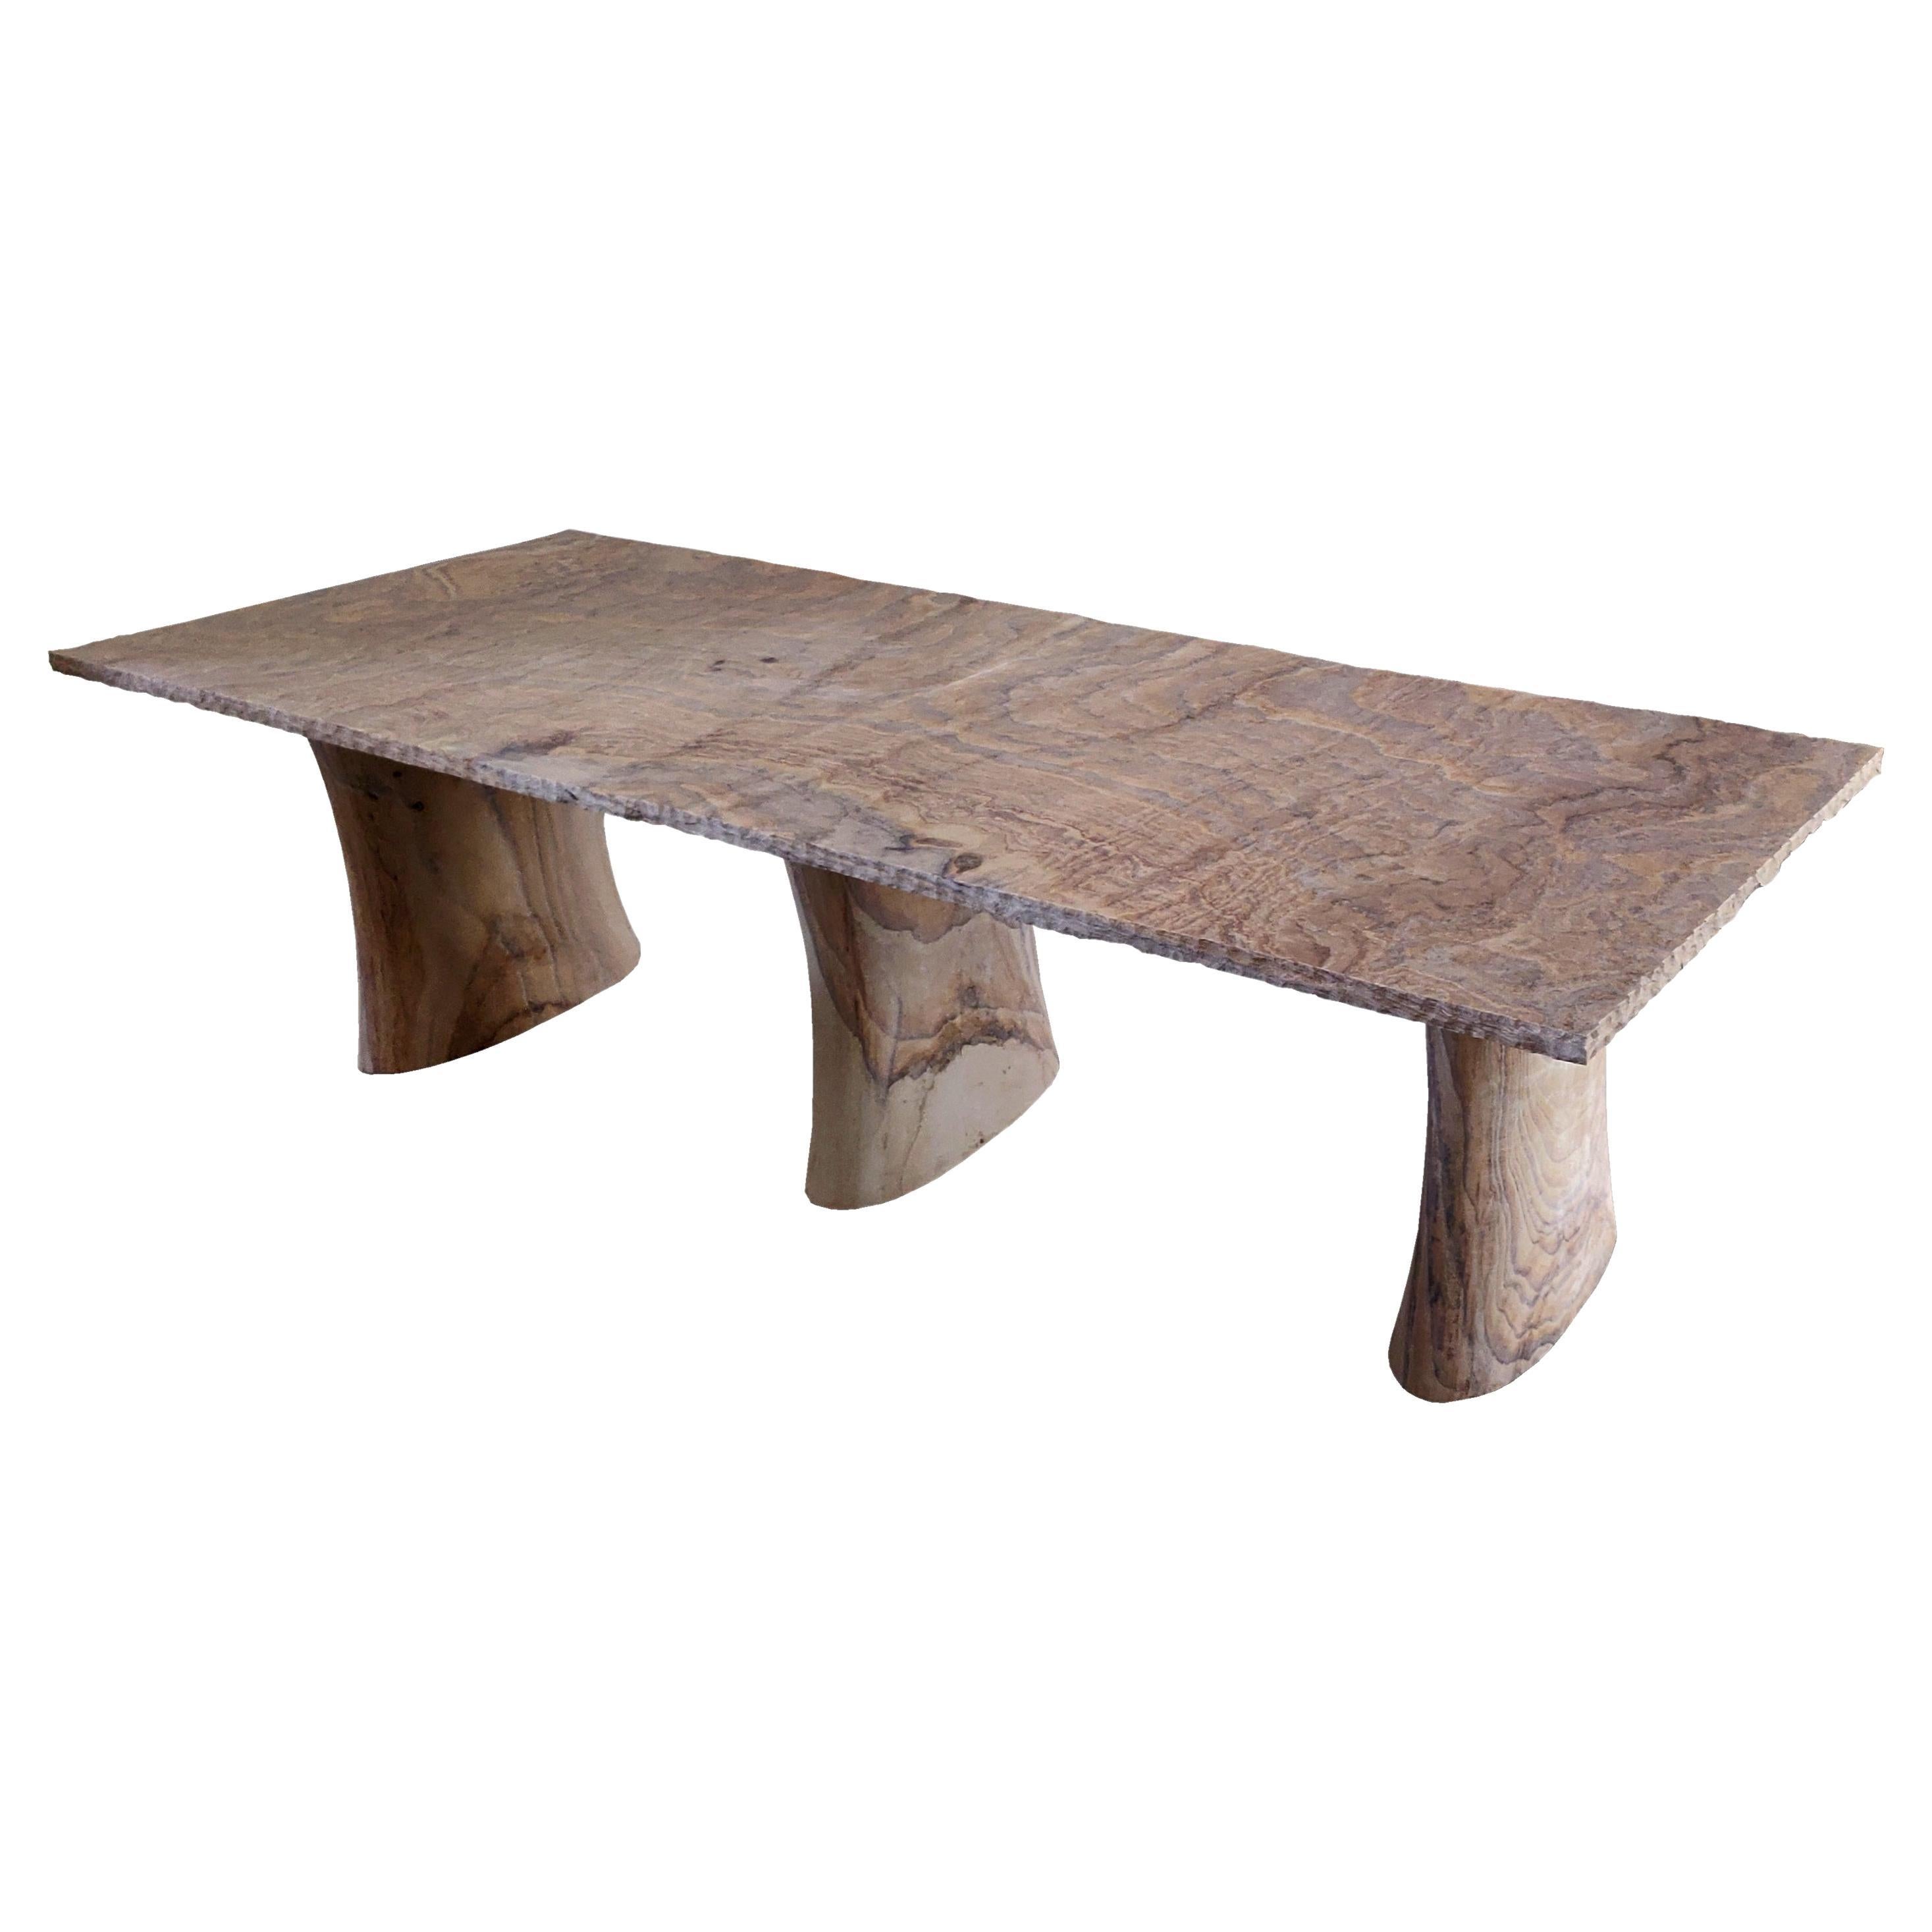 Modern Dining Room Table Hand Carved in Sandstone, Modern Dining Table by Paul For Sale